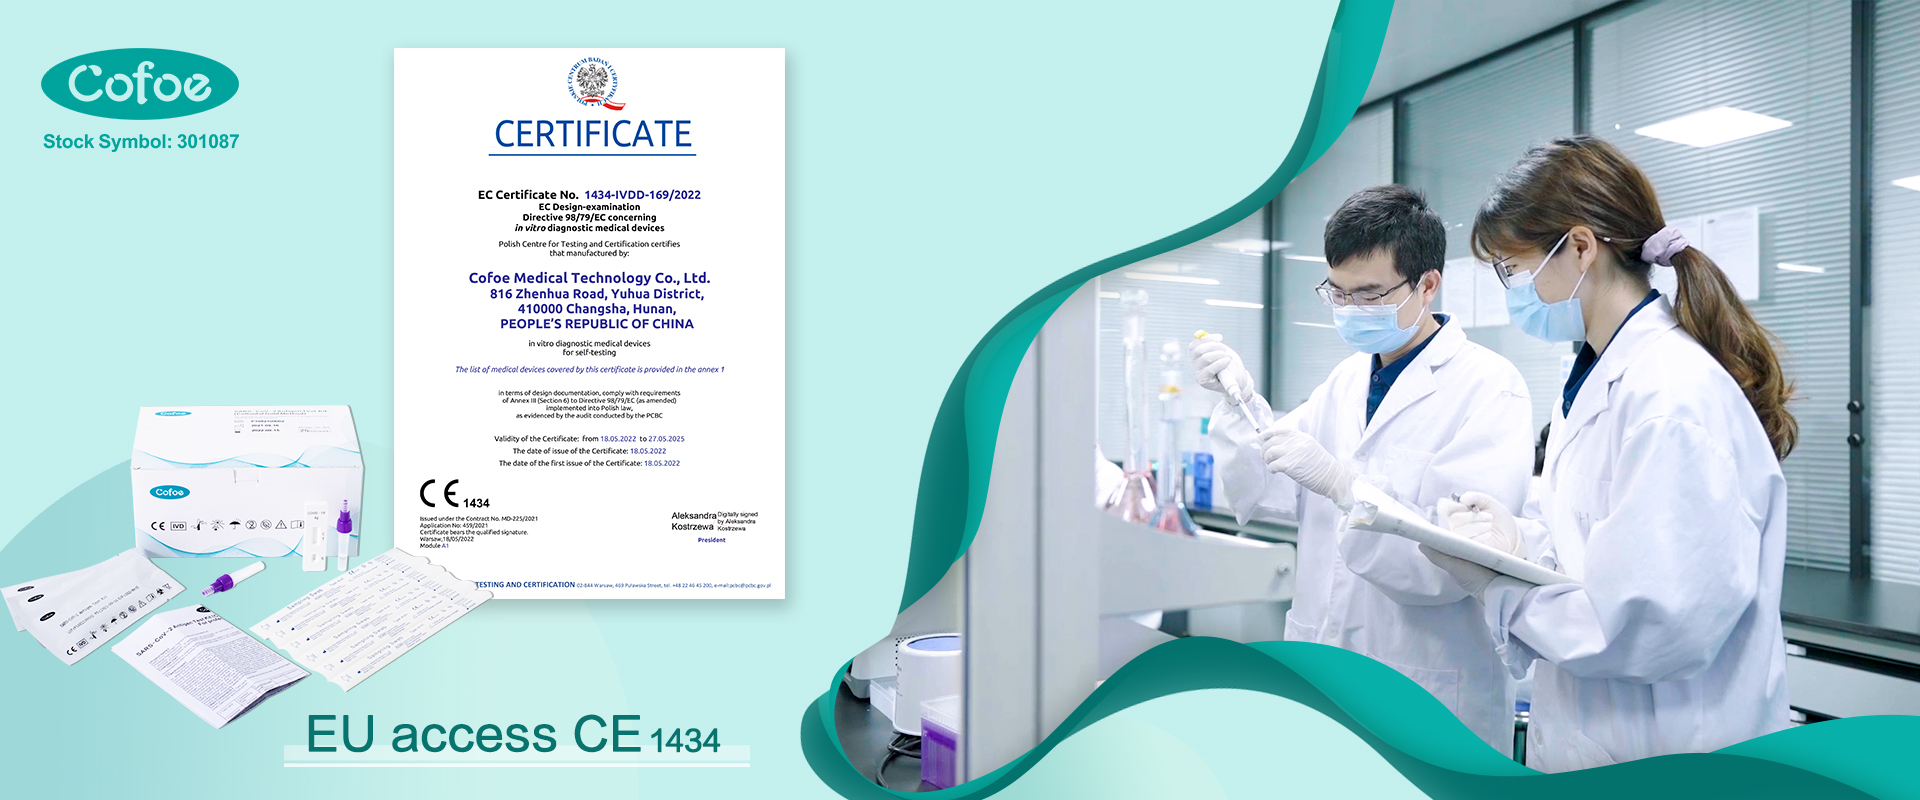 Cofoe got AG self test access to EU marke after getting CE1434 Certificate on 18th May